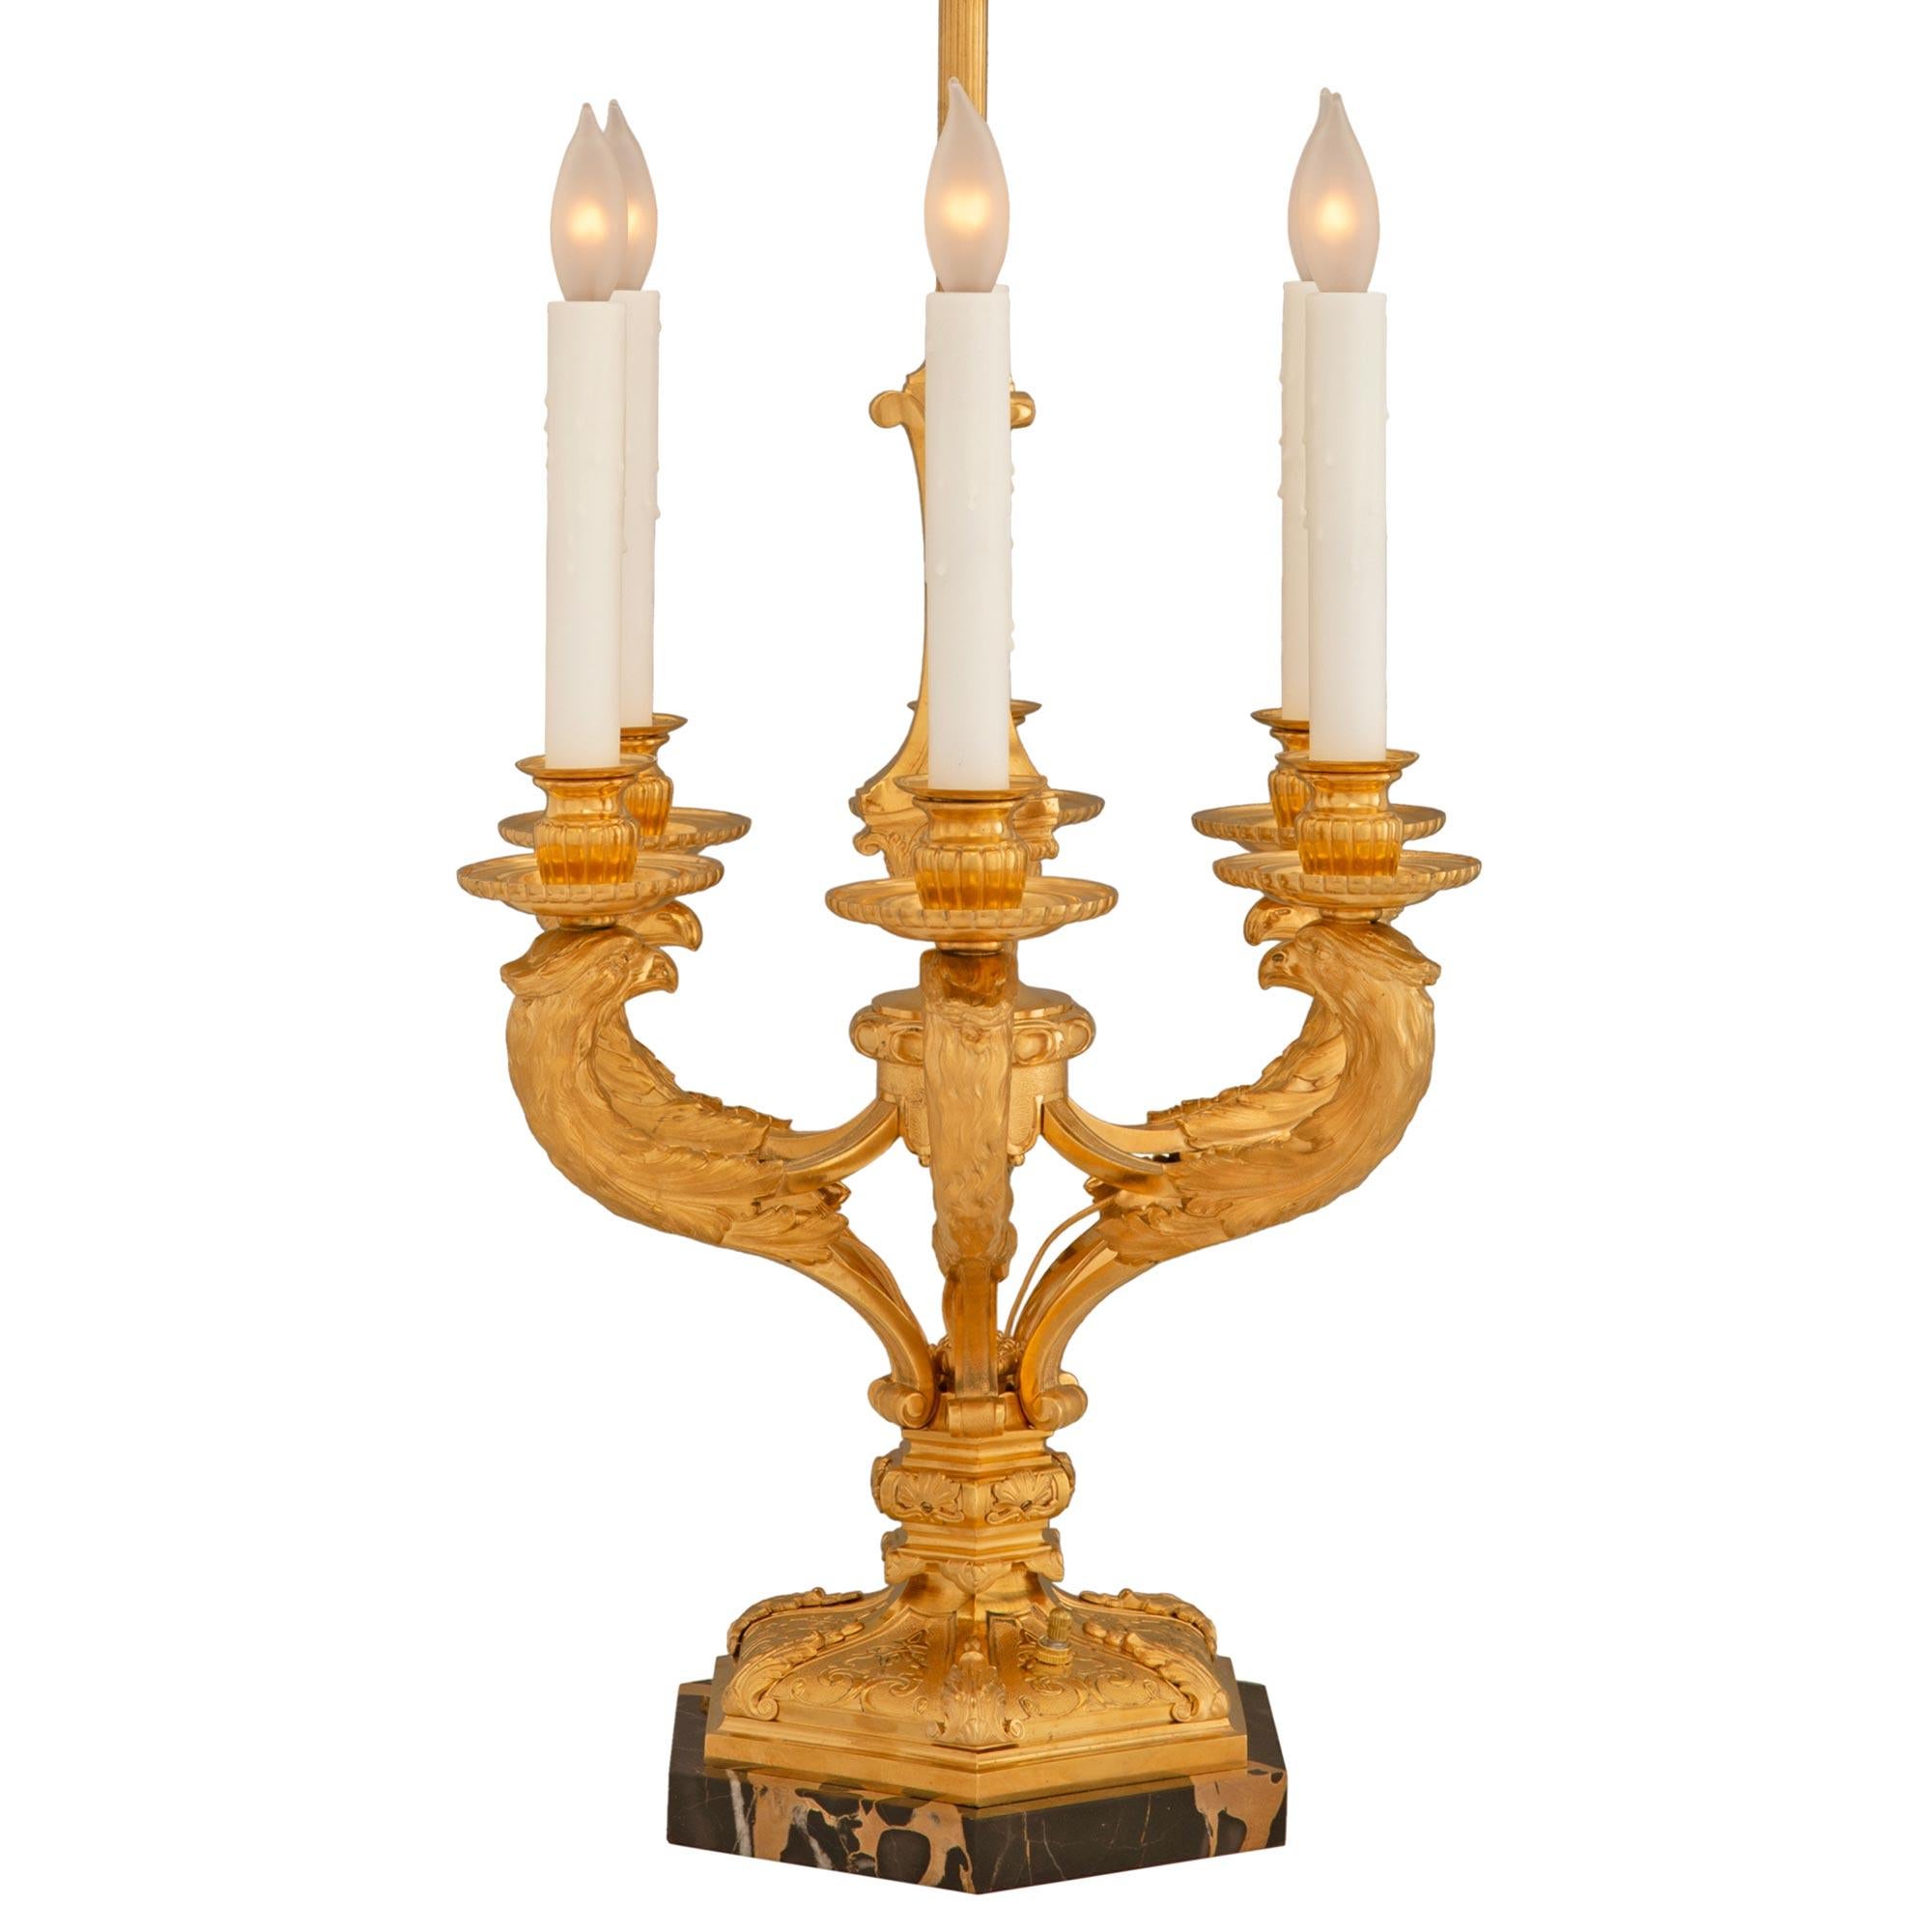 A most impressive and high quality pair of French 19th century Louis XIV st. ormolu and Portoro marble candelabra lamps signed Maison Bagues. The pair of six arm lamps are raised on hexagon shaped Portoro marble bases below an ormolu mount in a